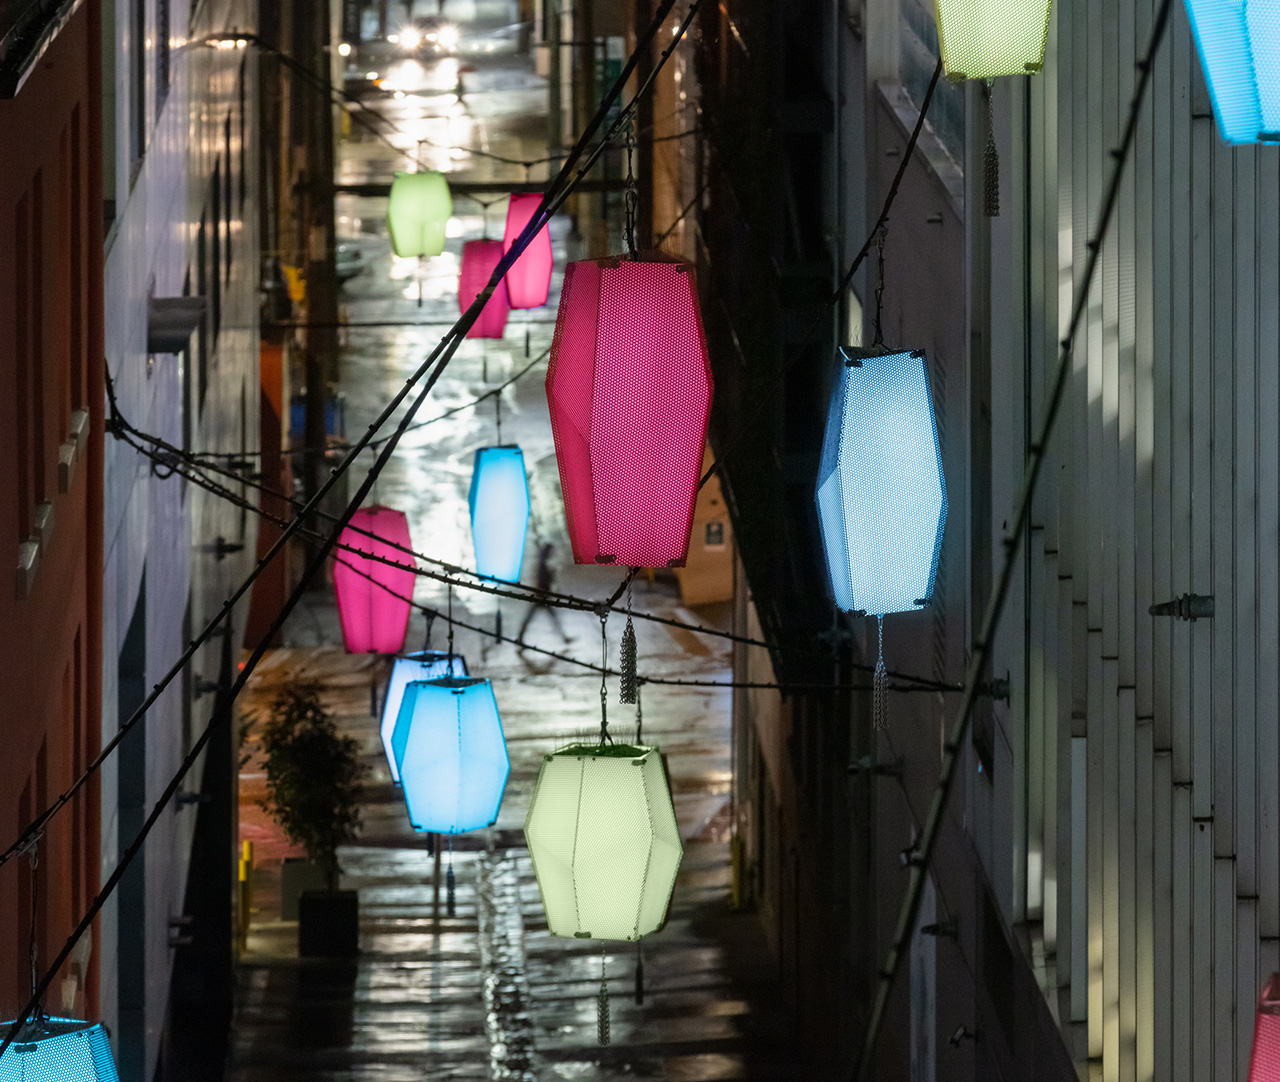 Detail image at dusk of Martin Boyce's art installation, Beyond the Sea, Against the Sun in the TELUS Garden laneway, which consists of a series of suspended lanterns.